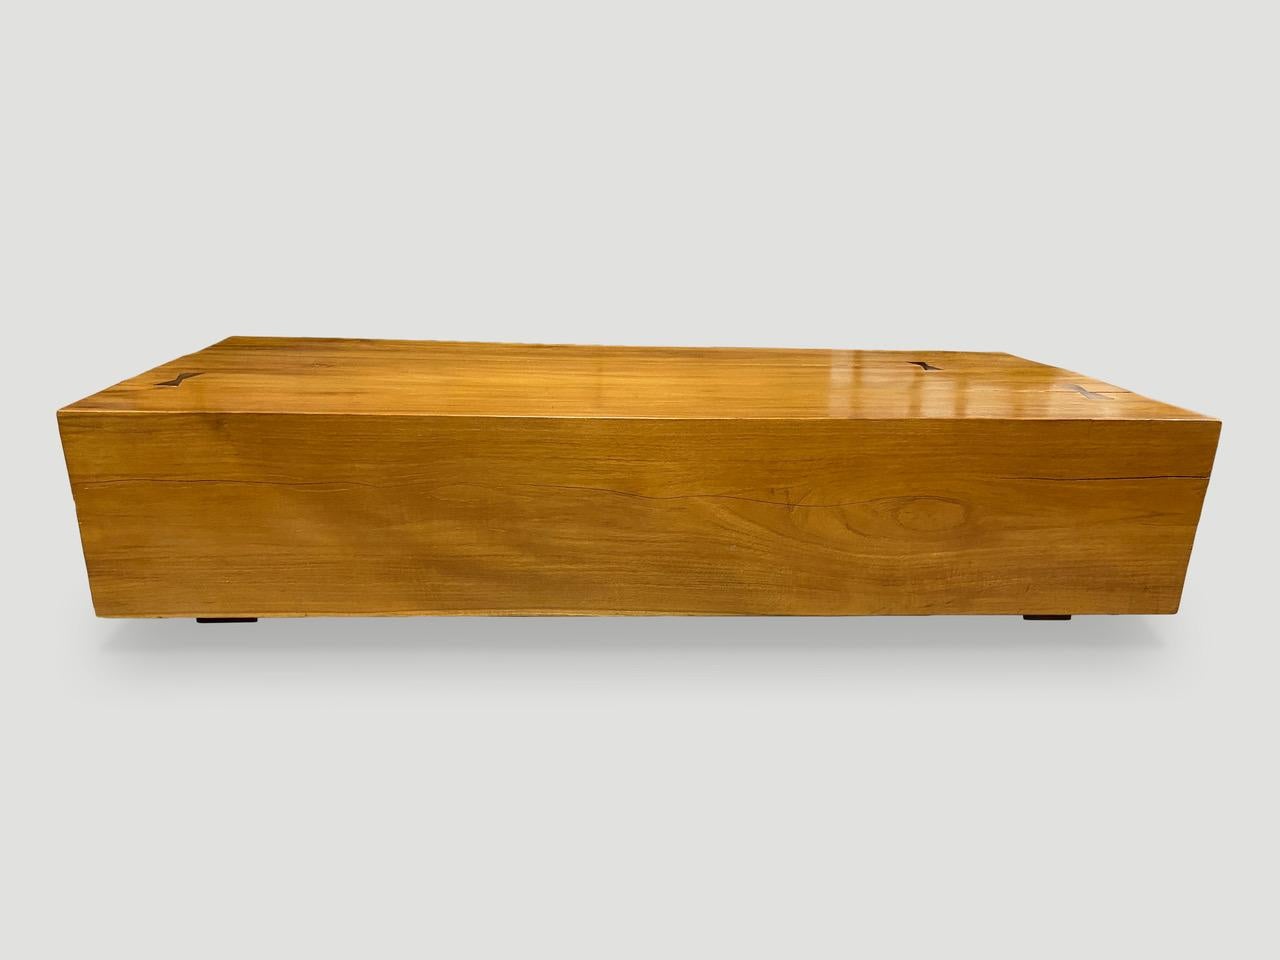 Andrianna Shamaris Modern Teak Wood Coffee Table In Excellent Condition For Sale In New York, NY